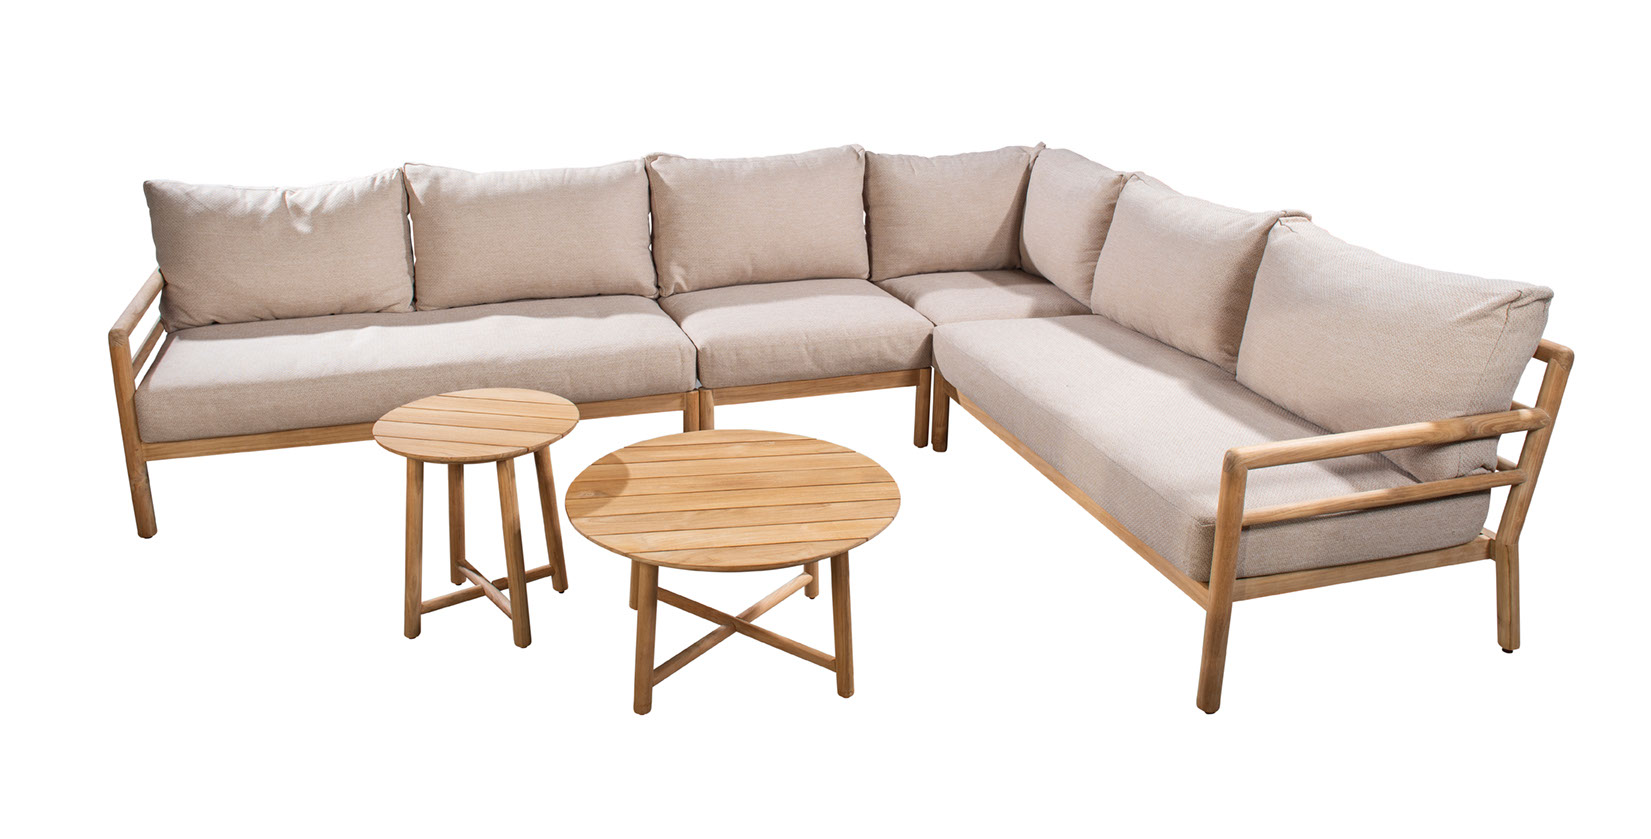 Yoi Mare Cornerset Teak Chaise longue left + right + Corner + Middle + Coffeetable Middle + Small